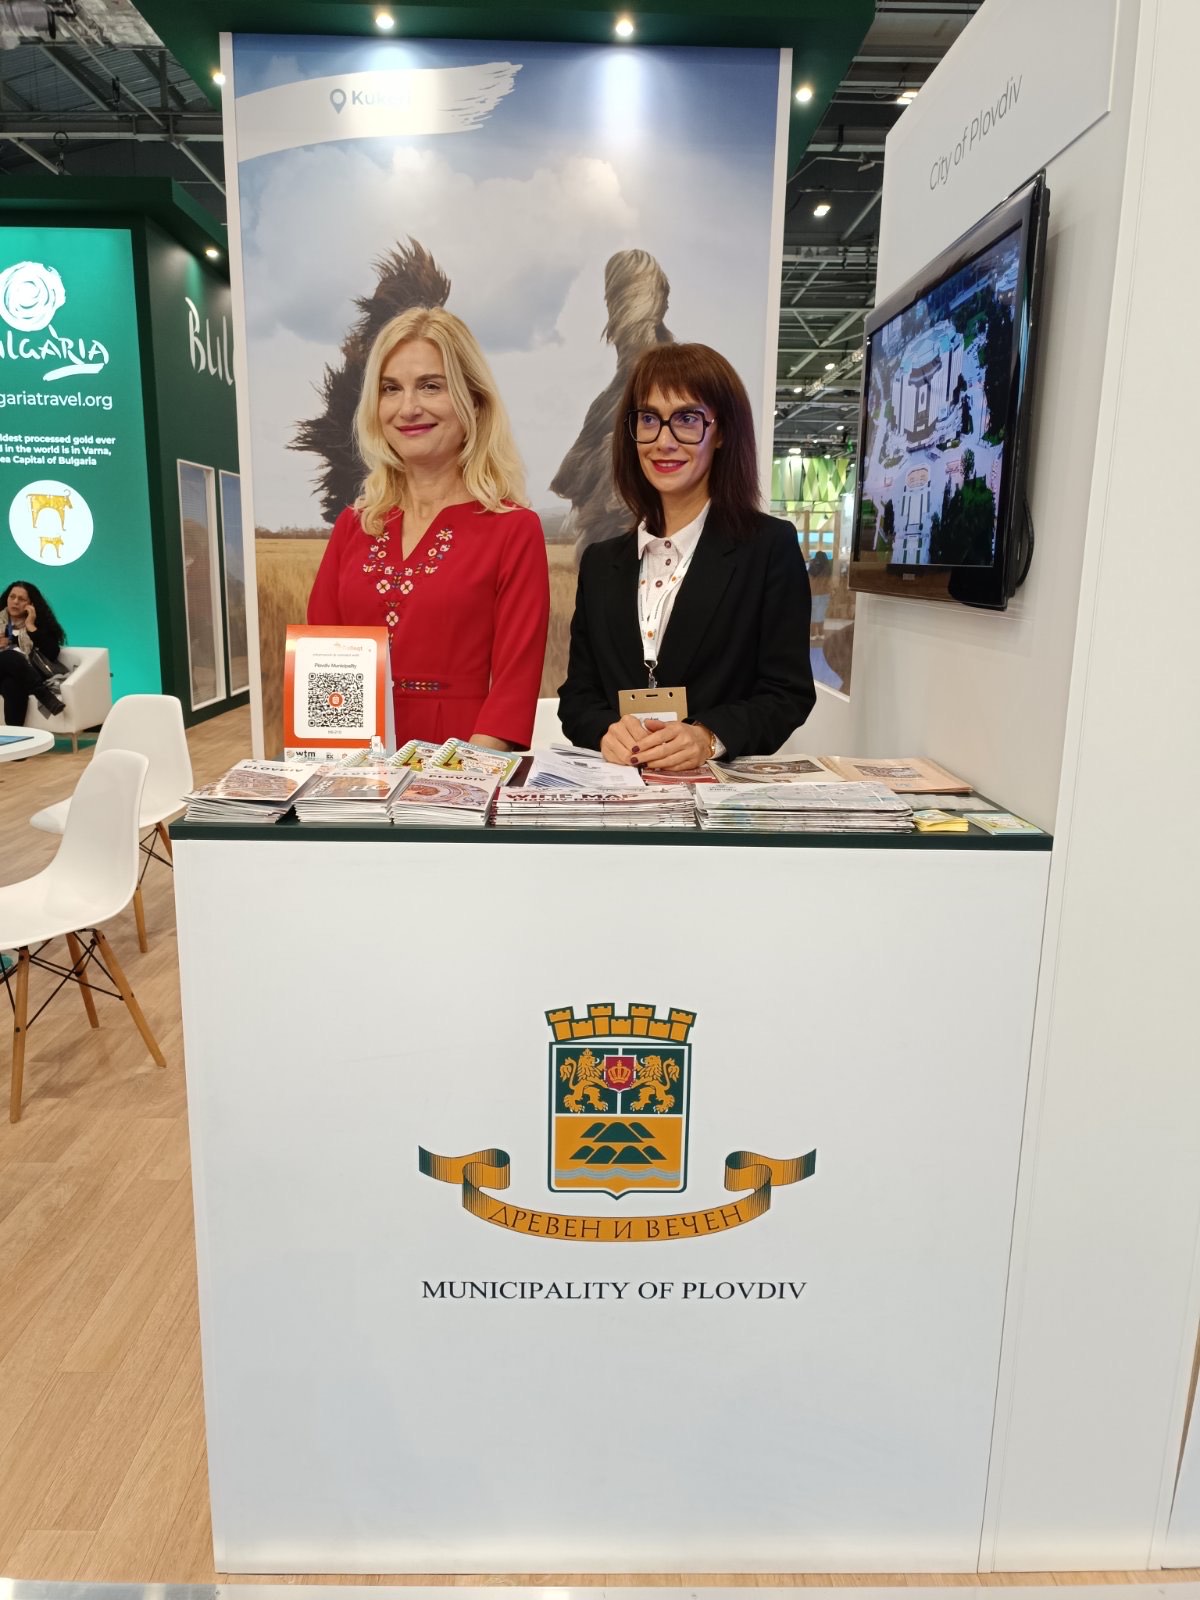 Plovdiv Municipality with participation at the World Travel Market in London